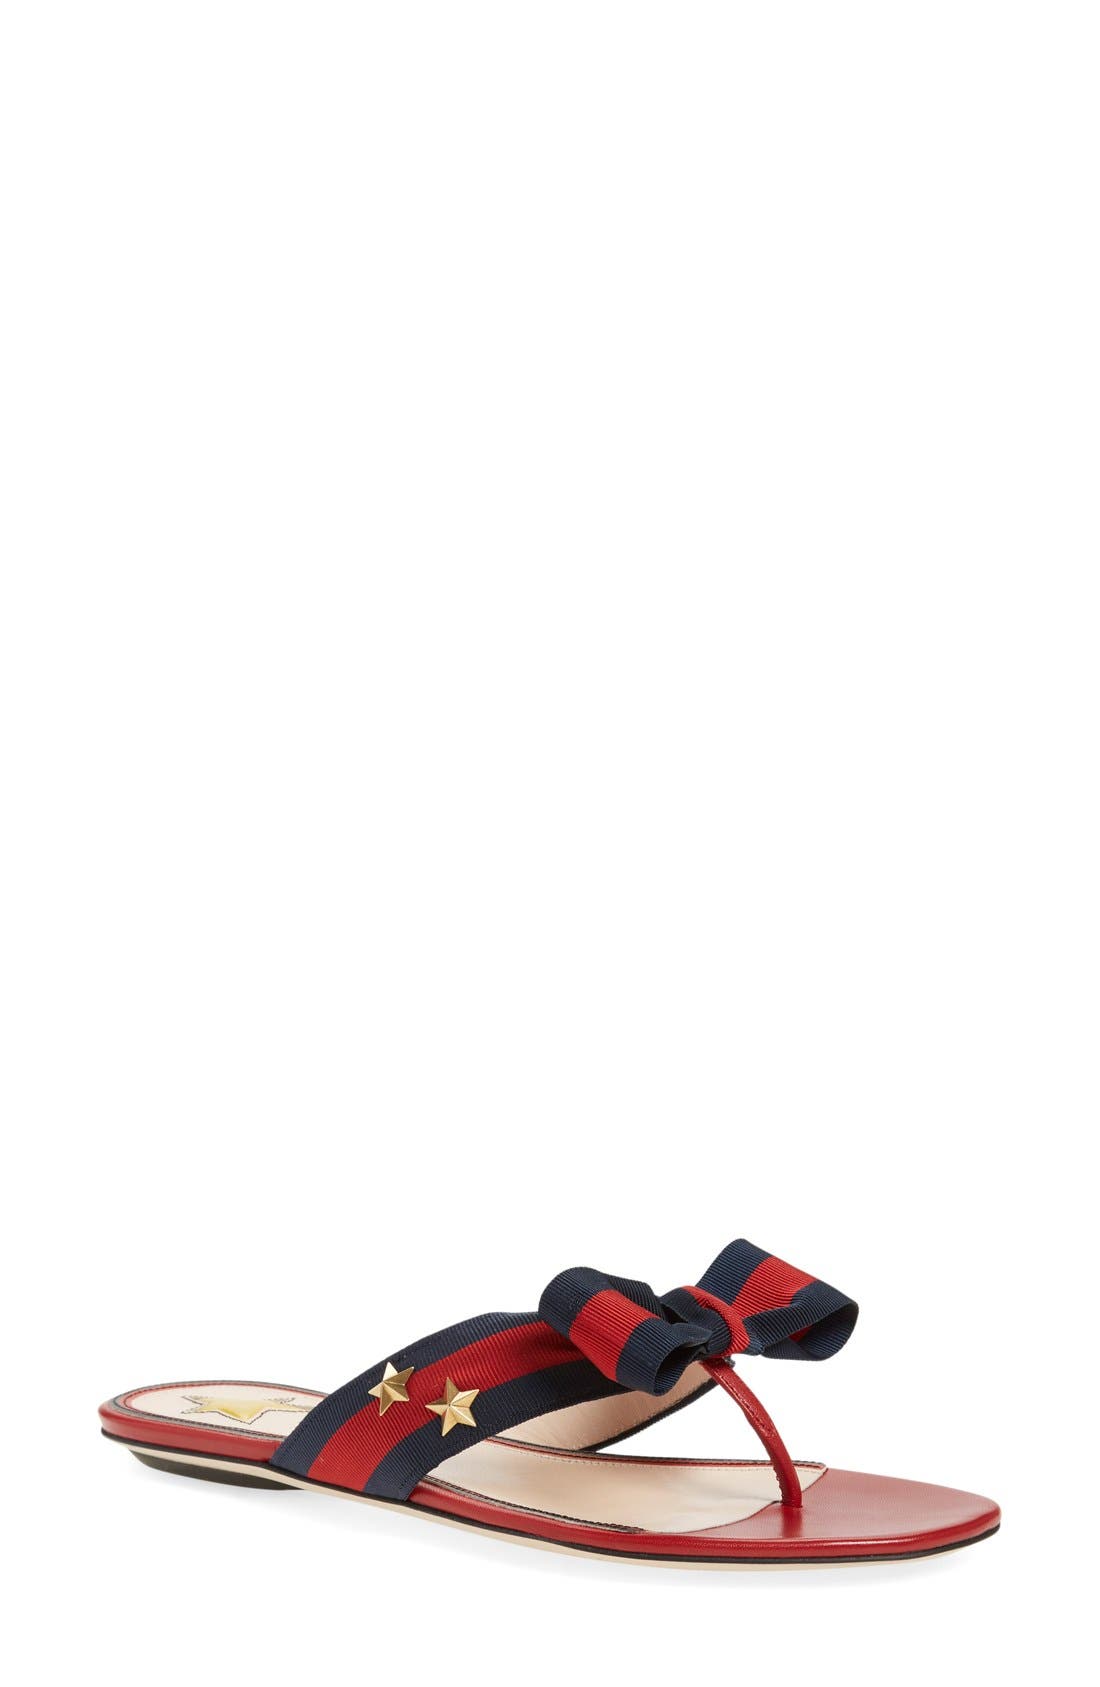 gucci bow slippers